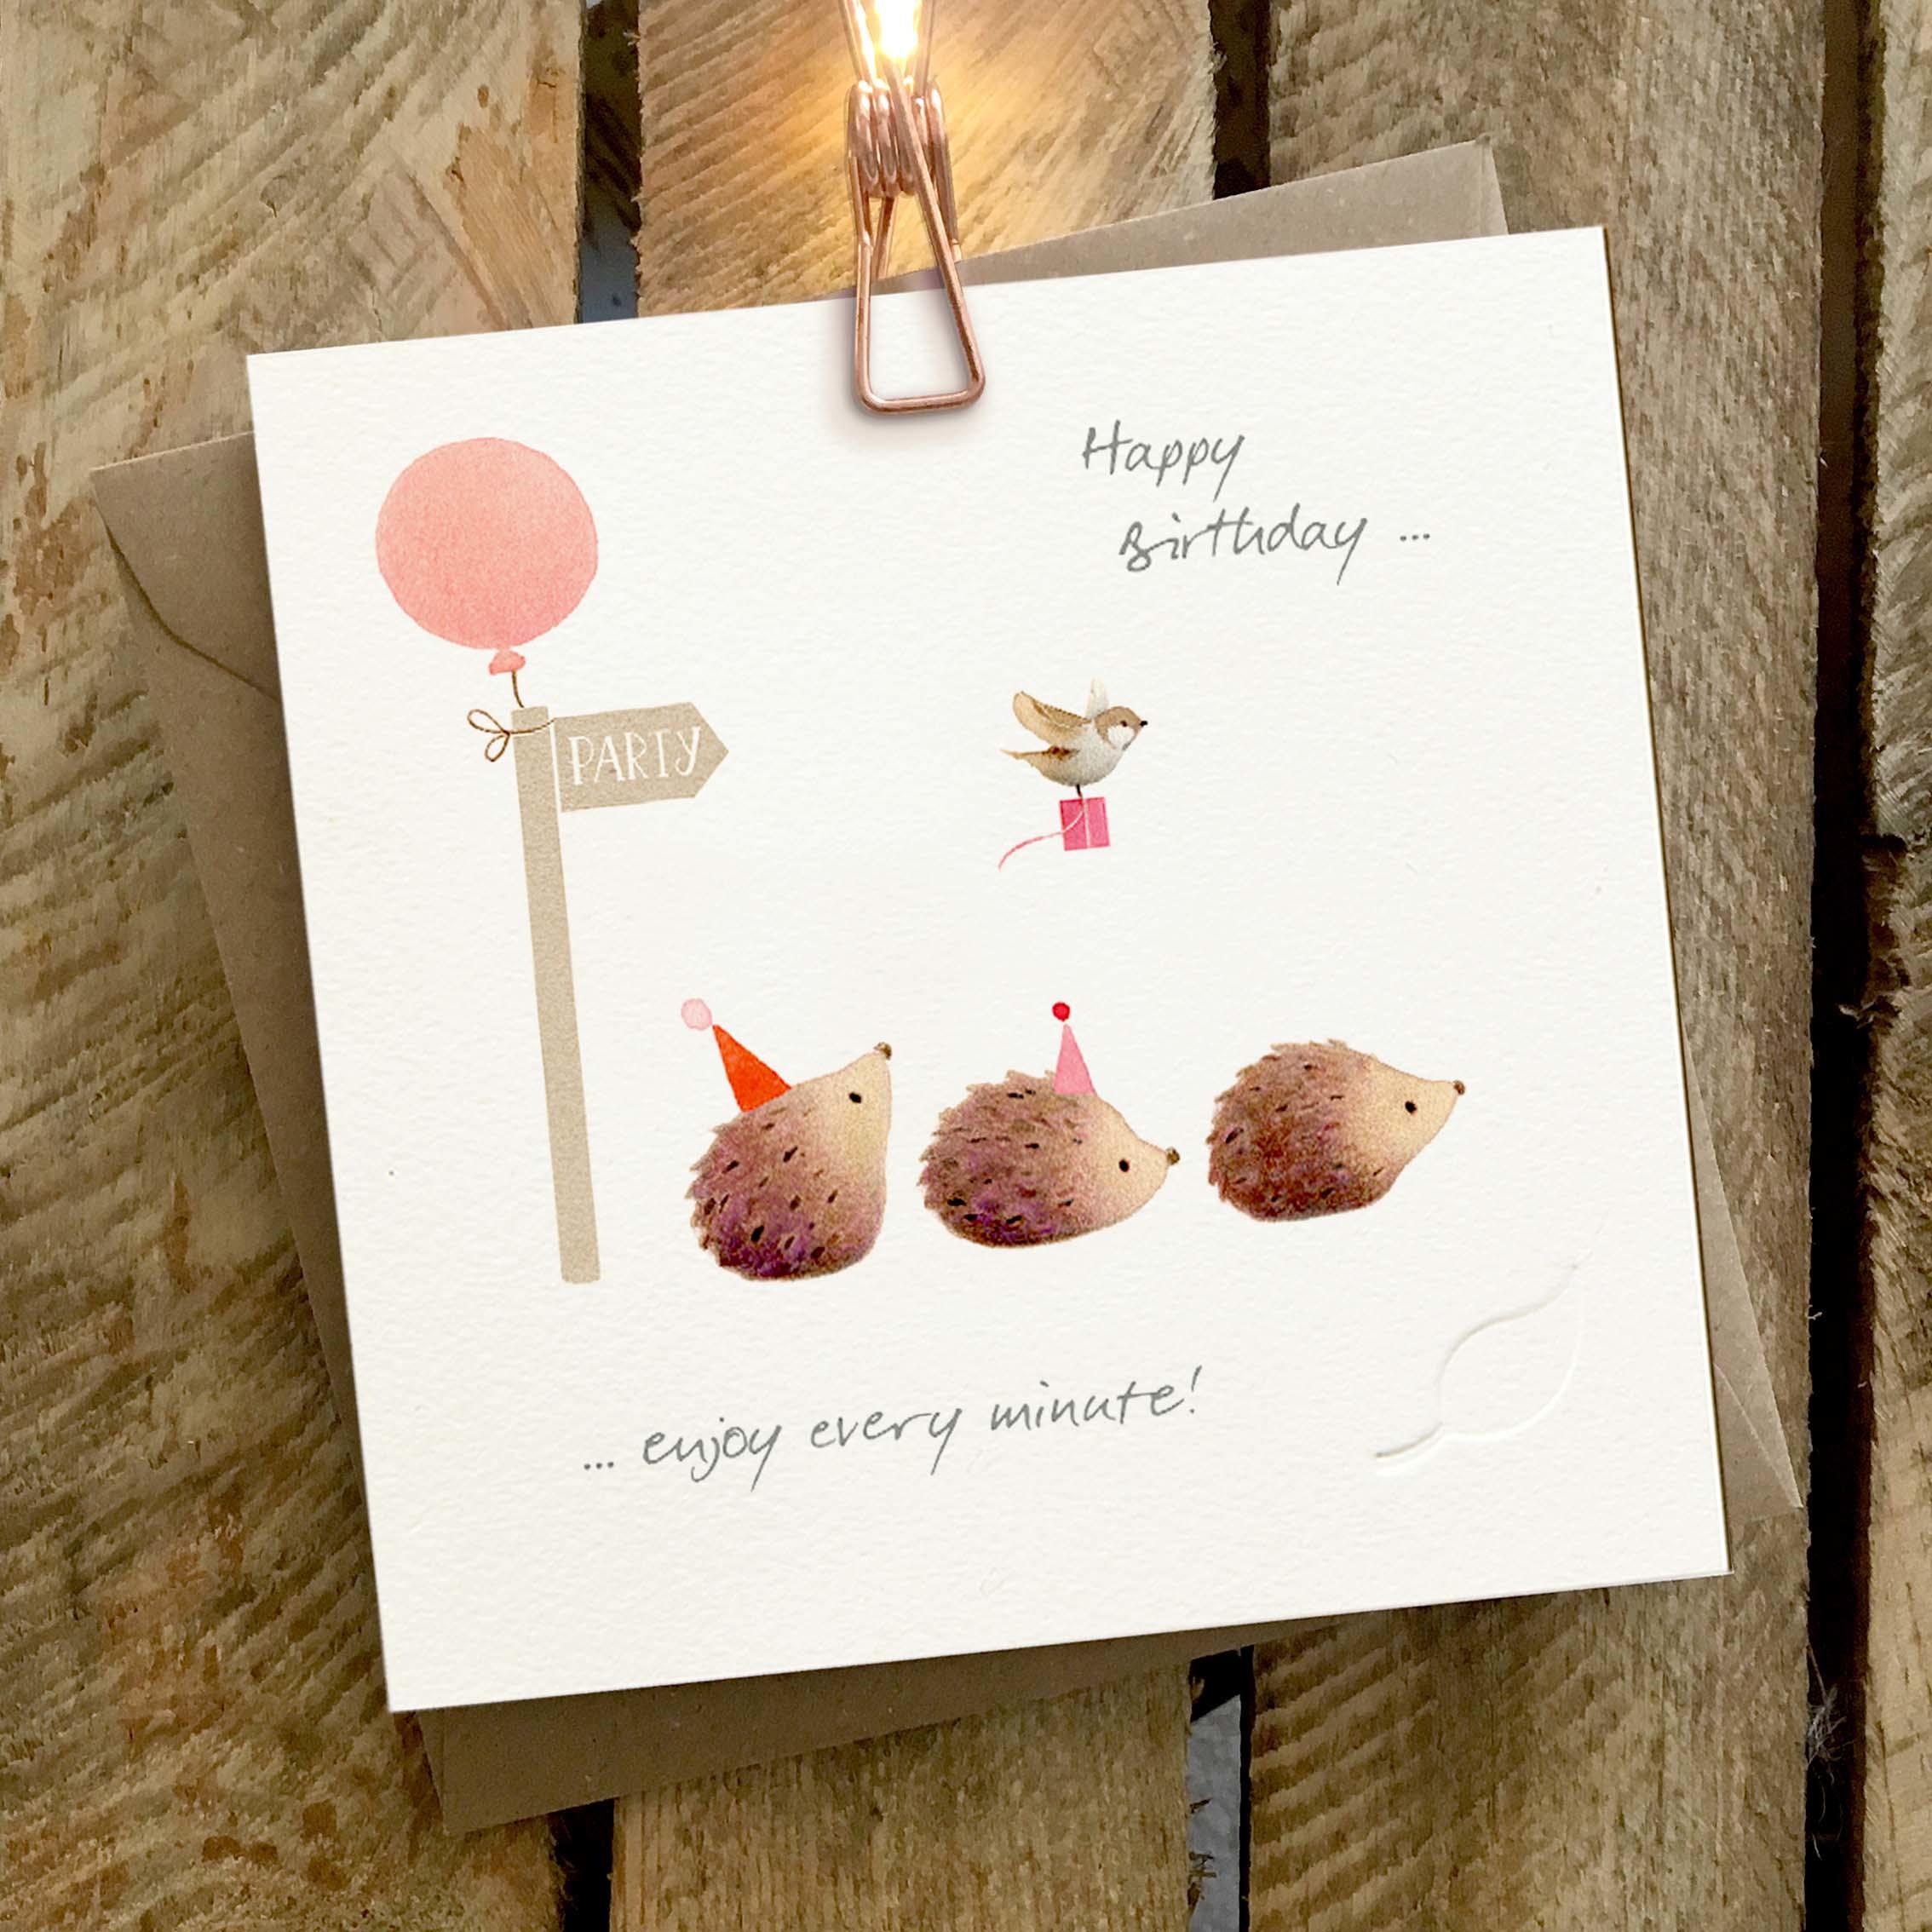 Card featuring a party sign, and three cute hedgehogs on the way to a party.